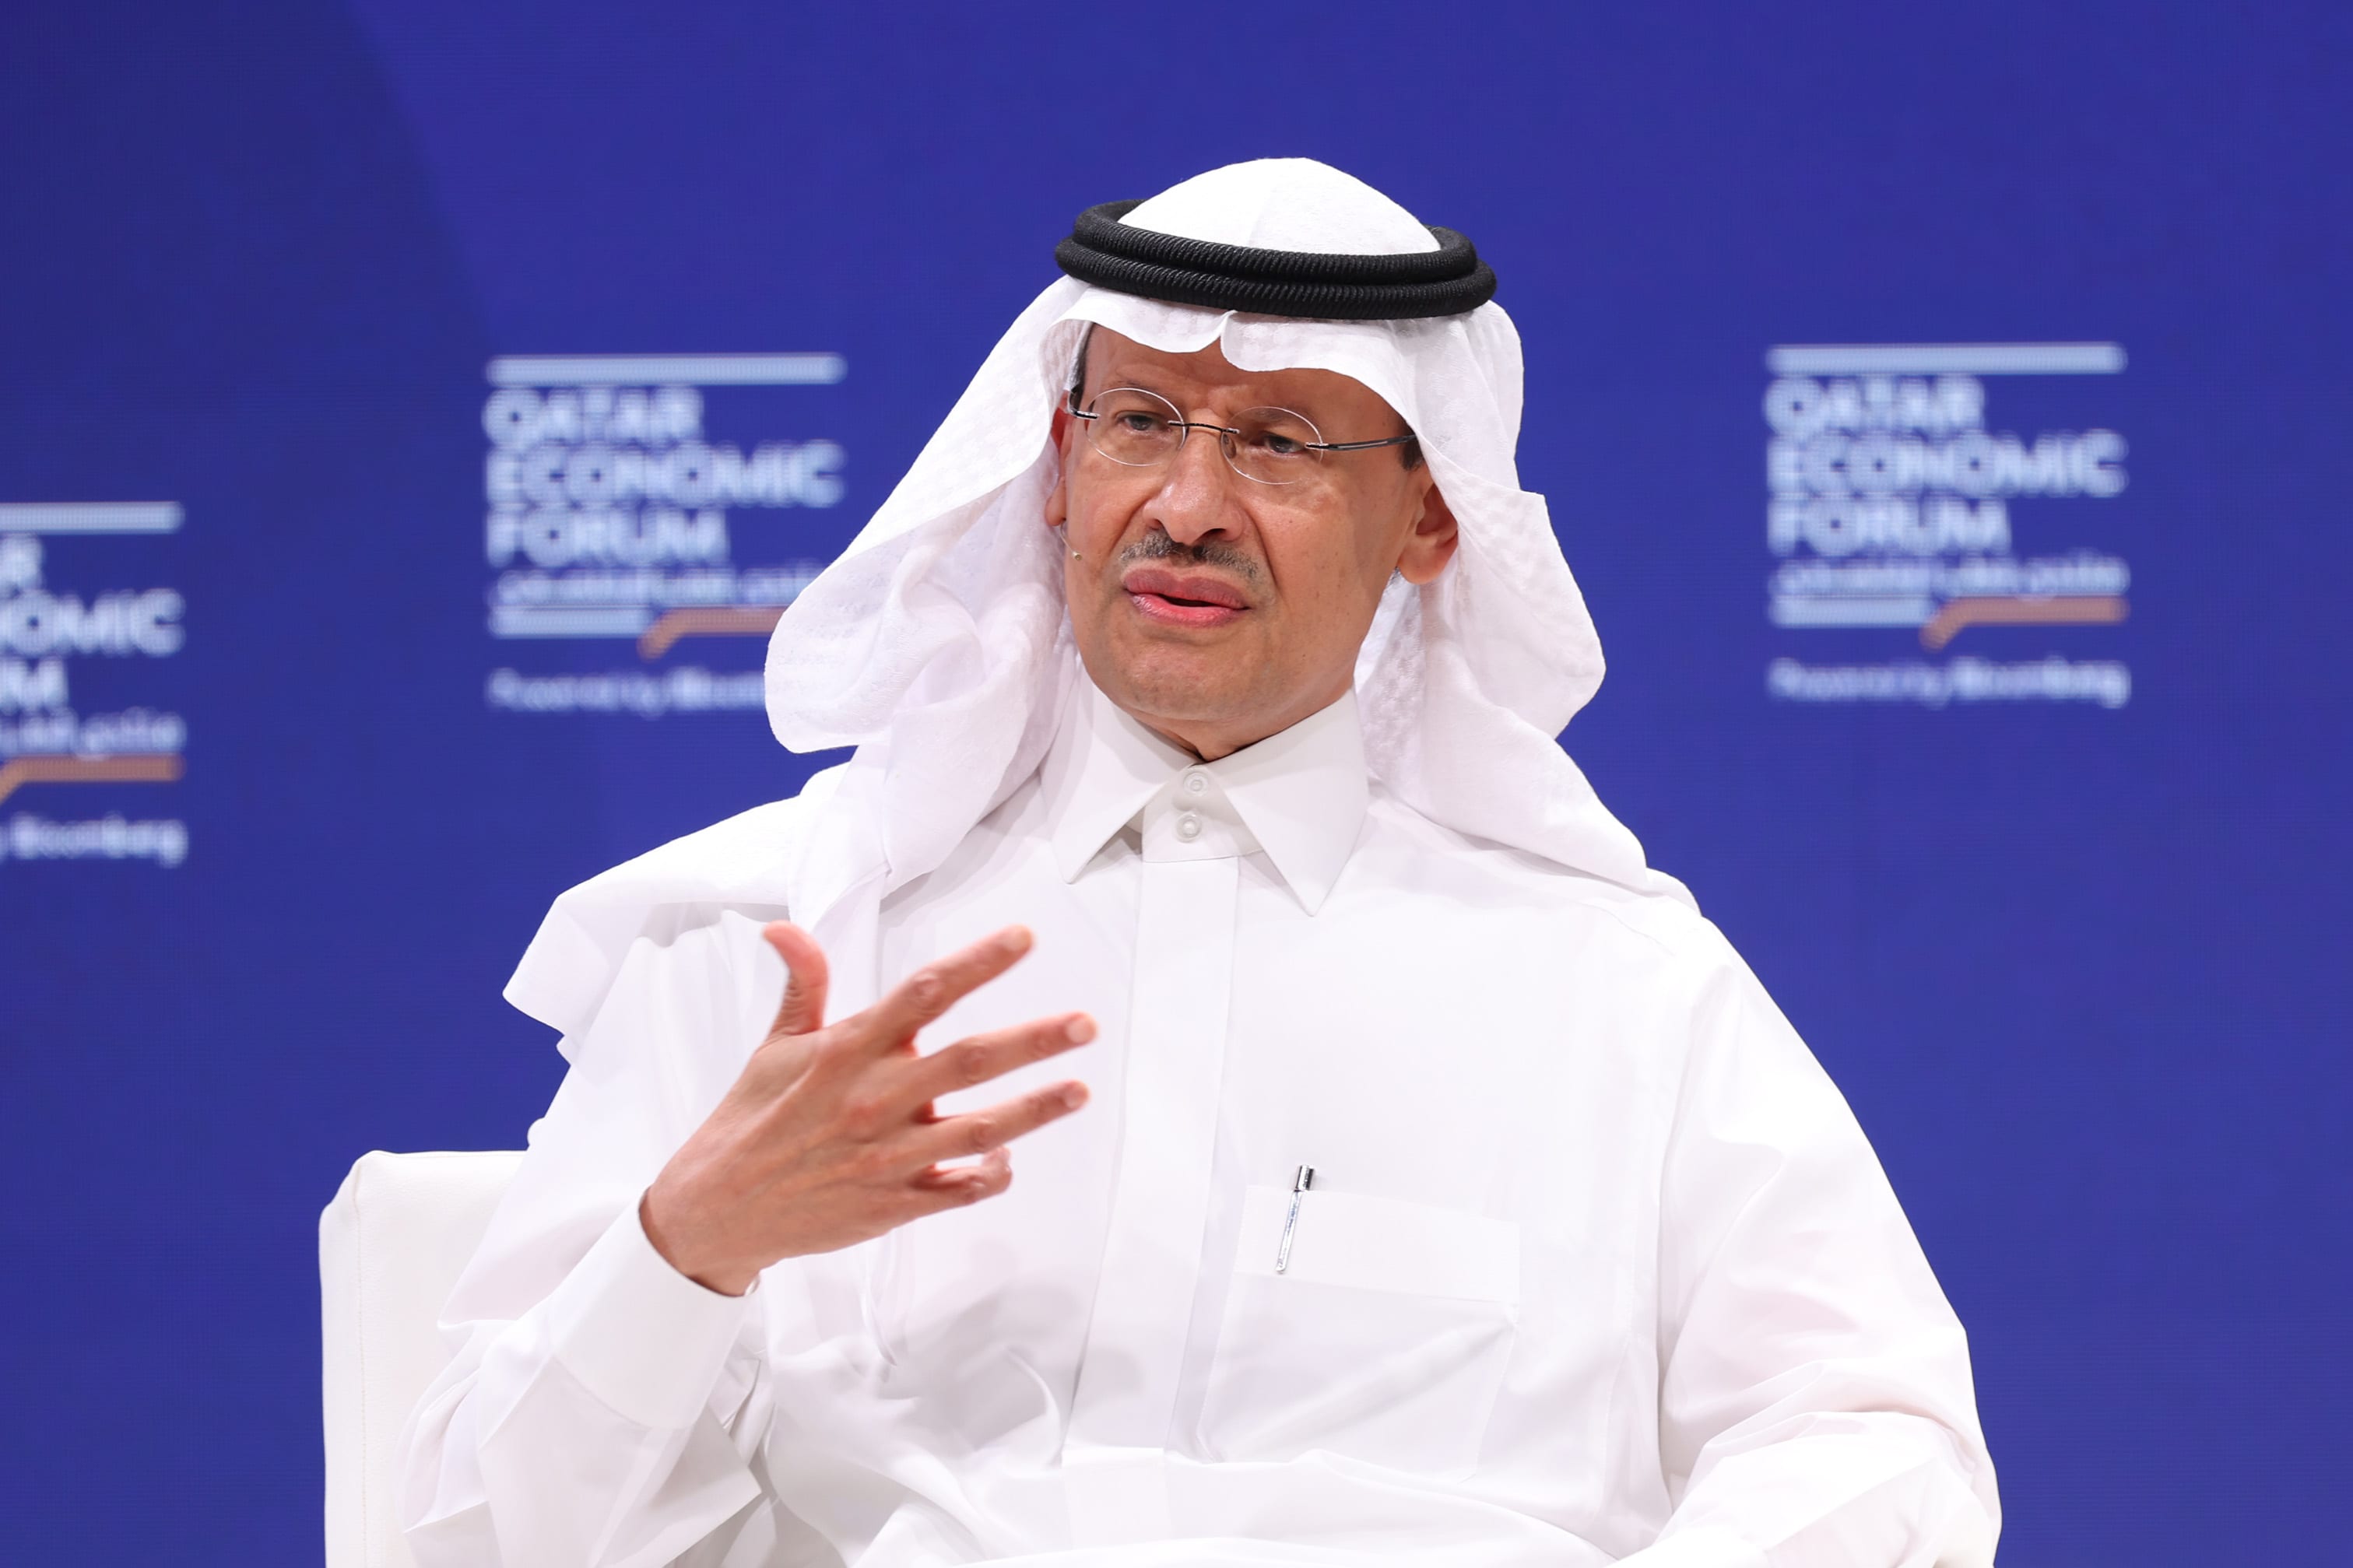 The Saudi Oil Minister warns market speculators to be “cautious” ahead of the OPEC+ meeting